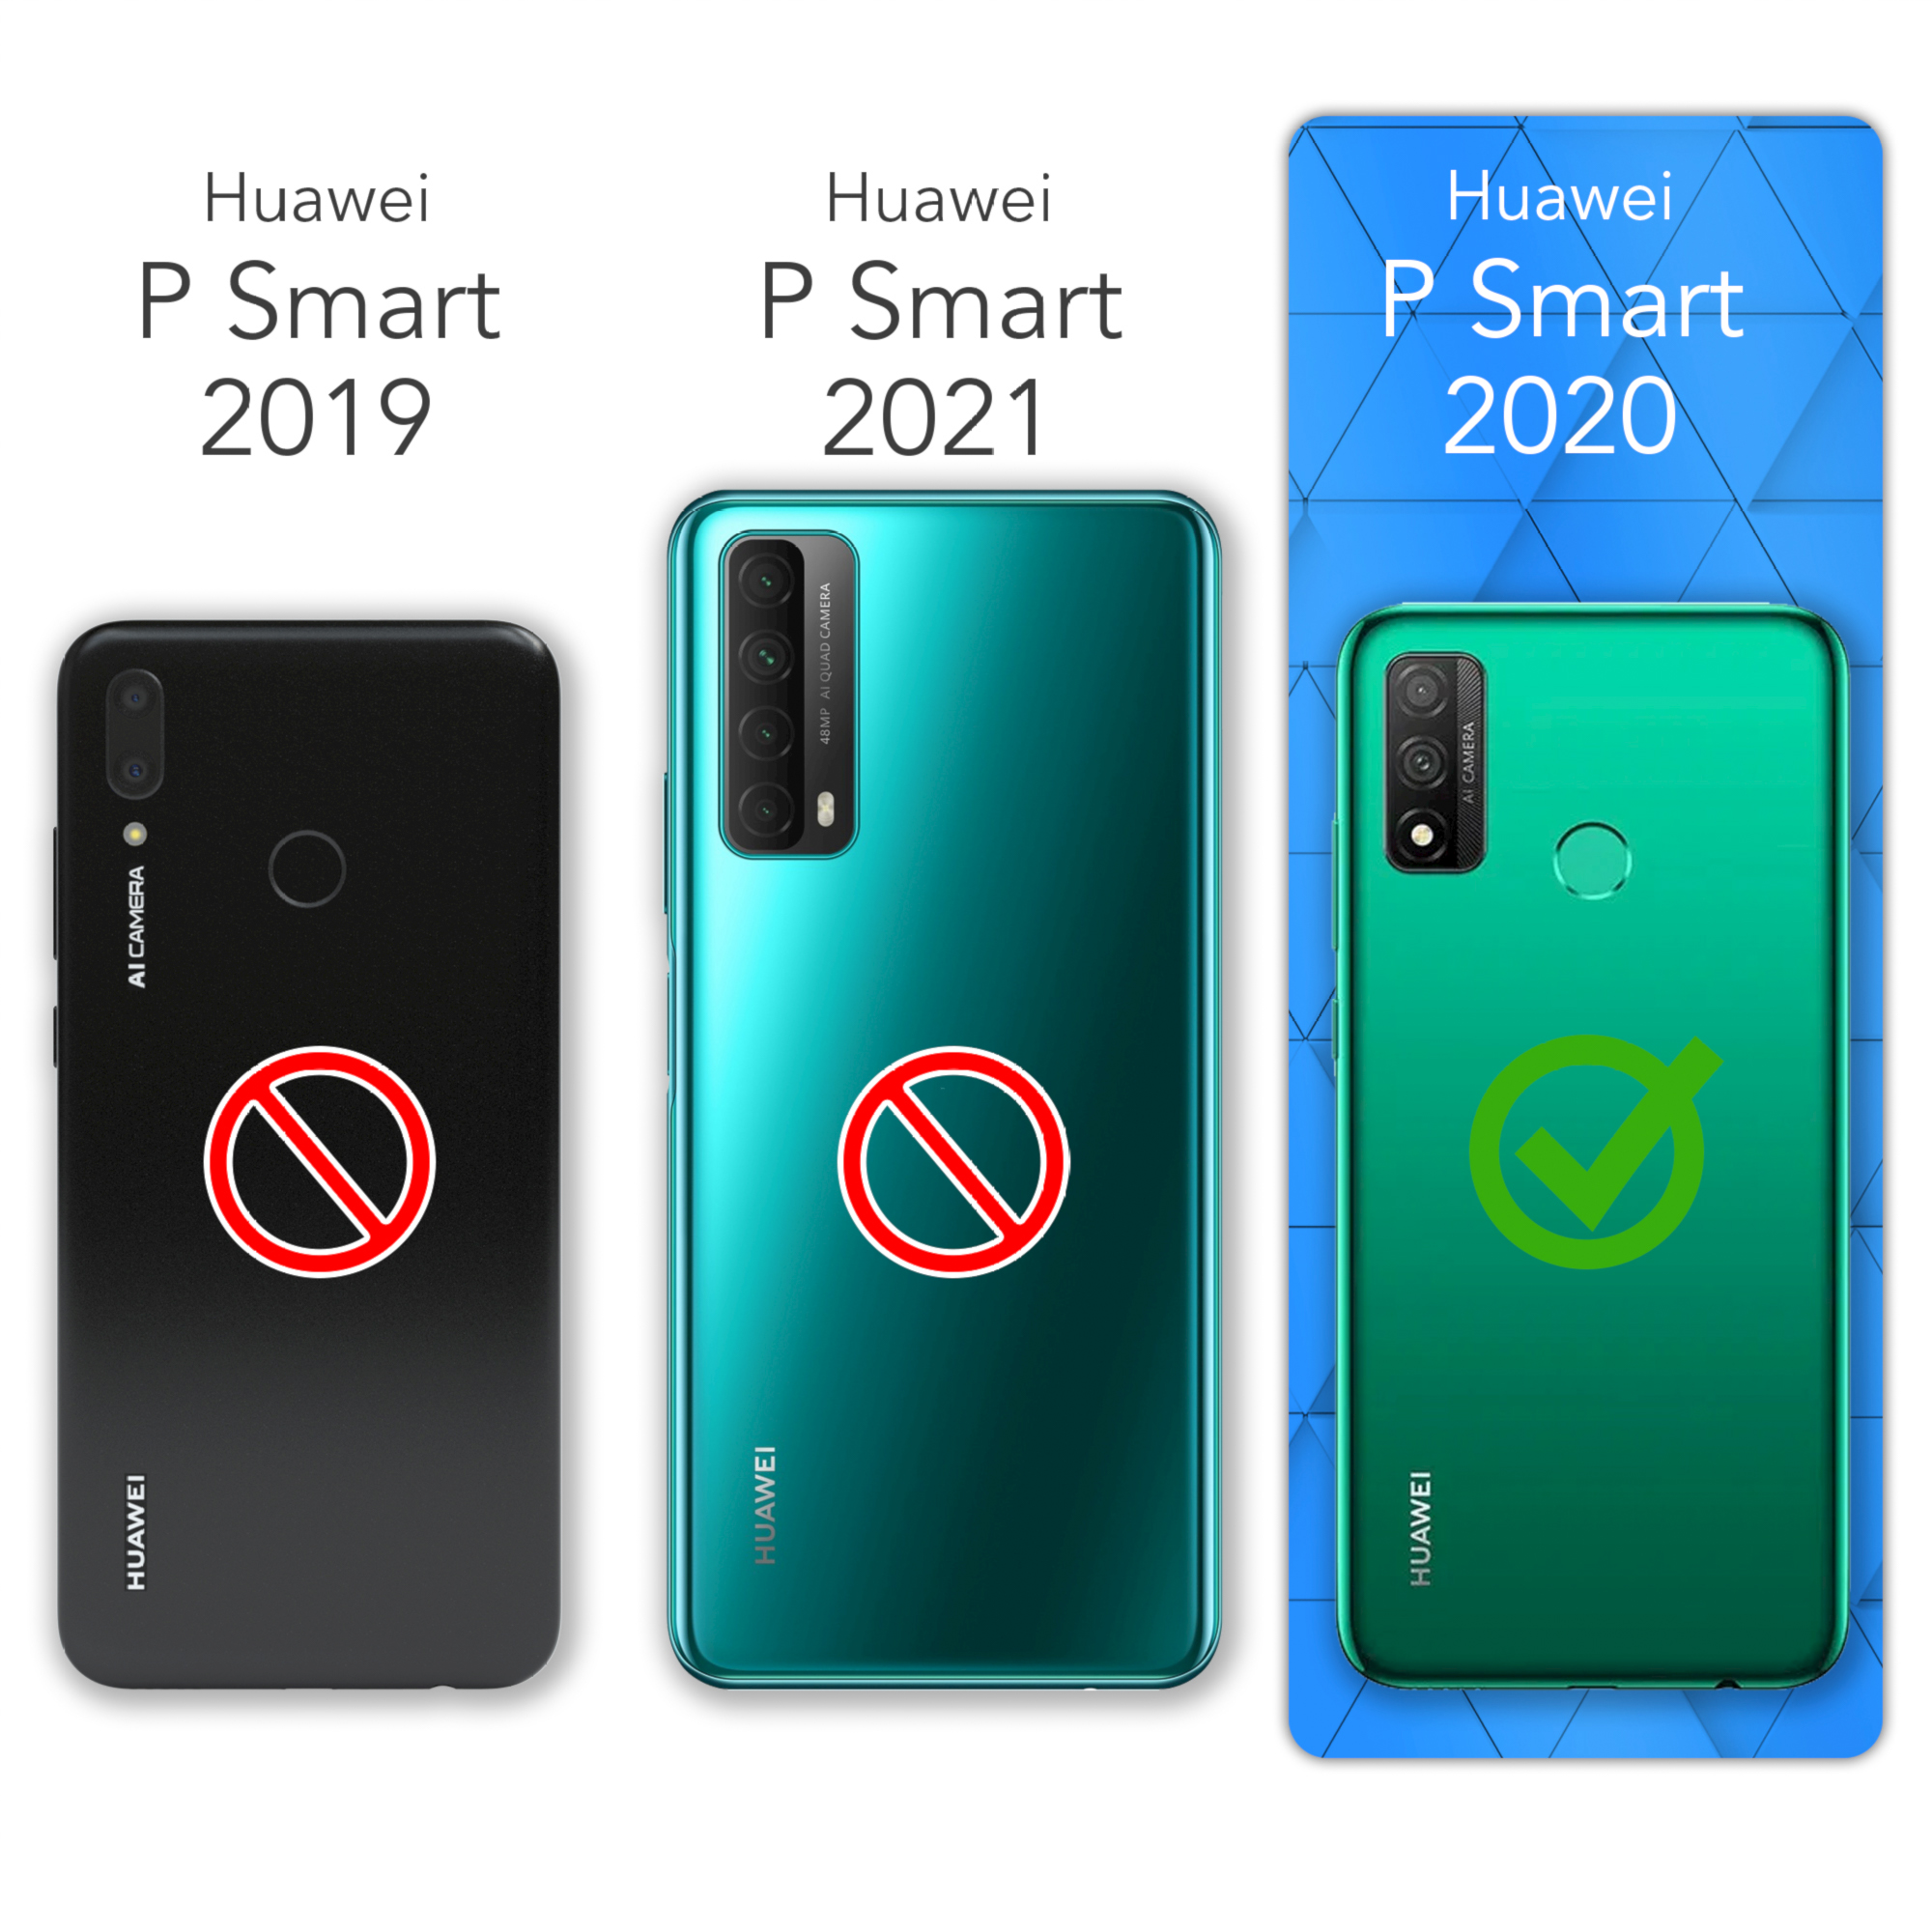 EAZY CASE P Backcover, Clear, Huawei, Slimcover Durchsichtig Smart (2020)